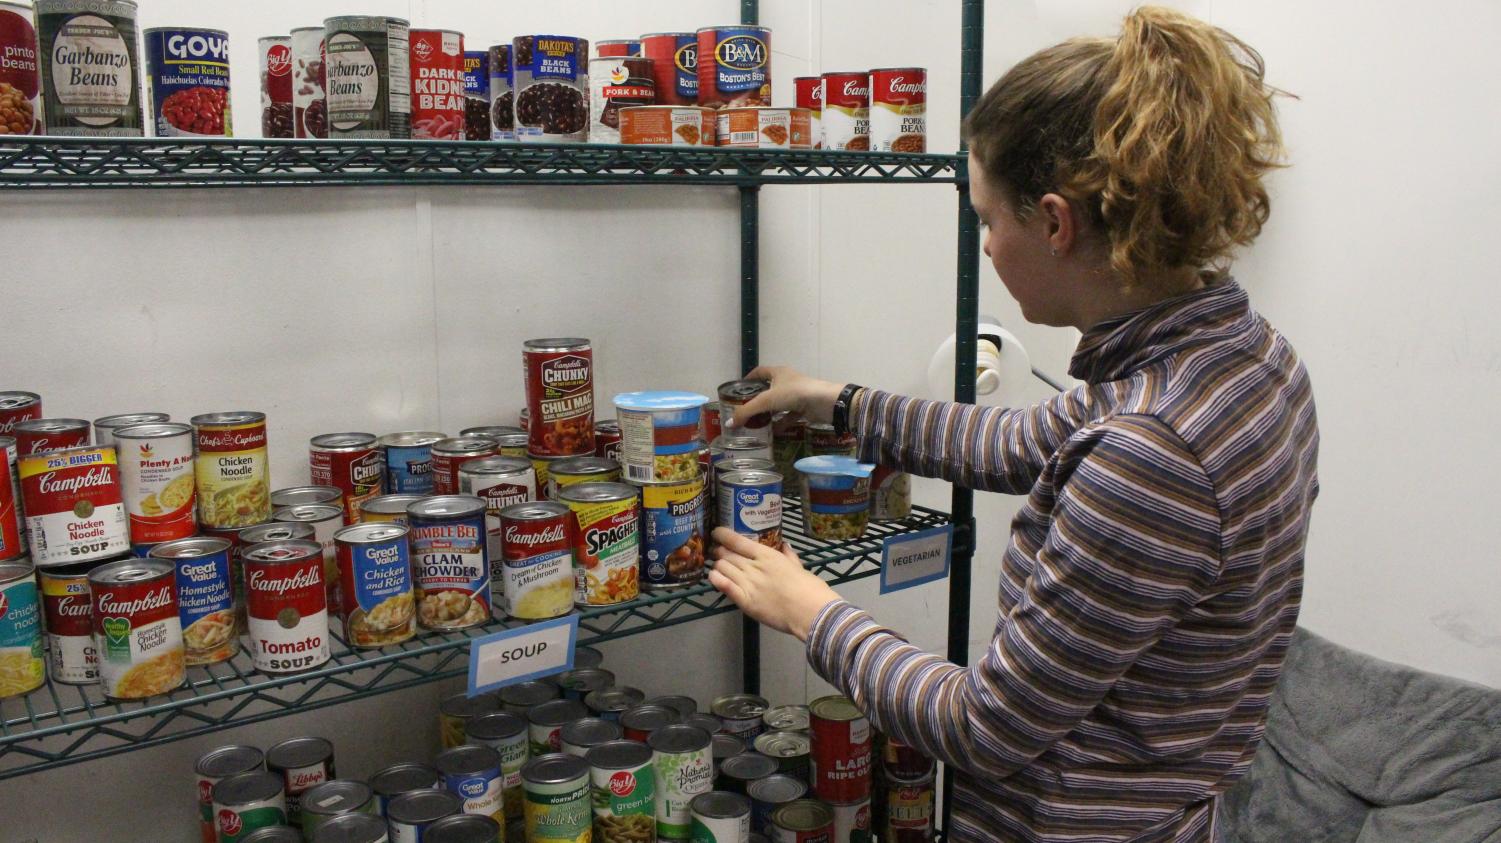 Amherst Wire | UMass Student Food Pantry usage growing on campus ...